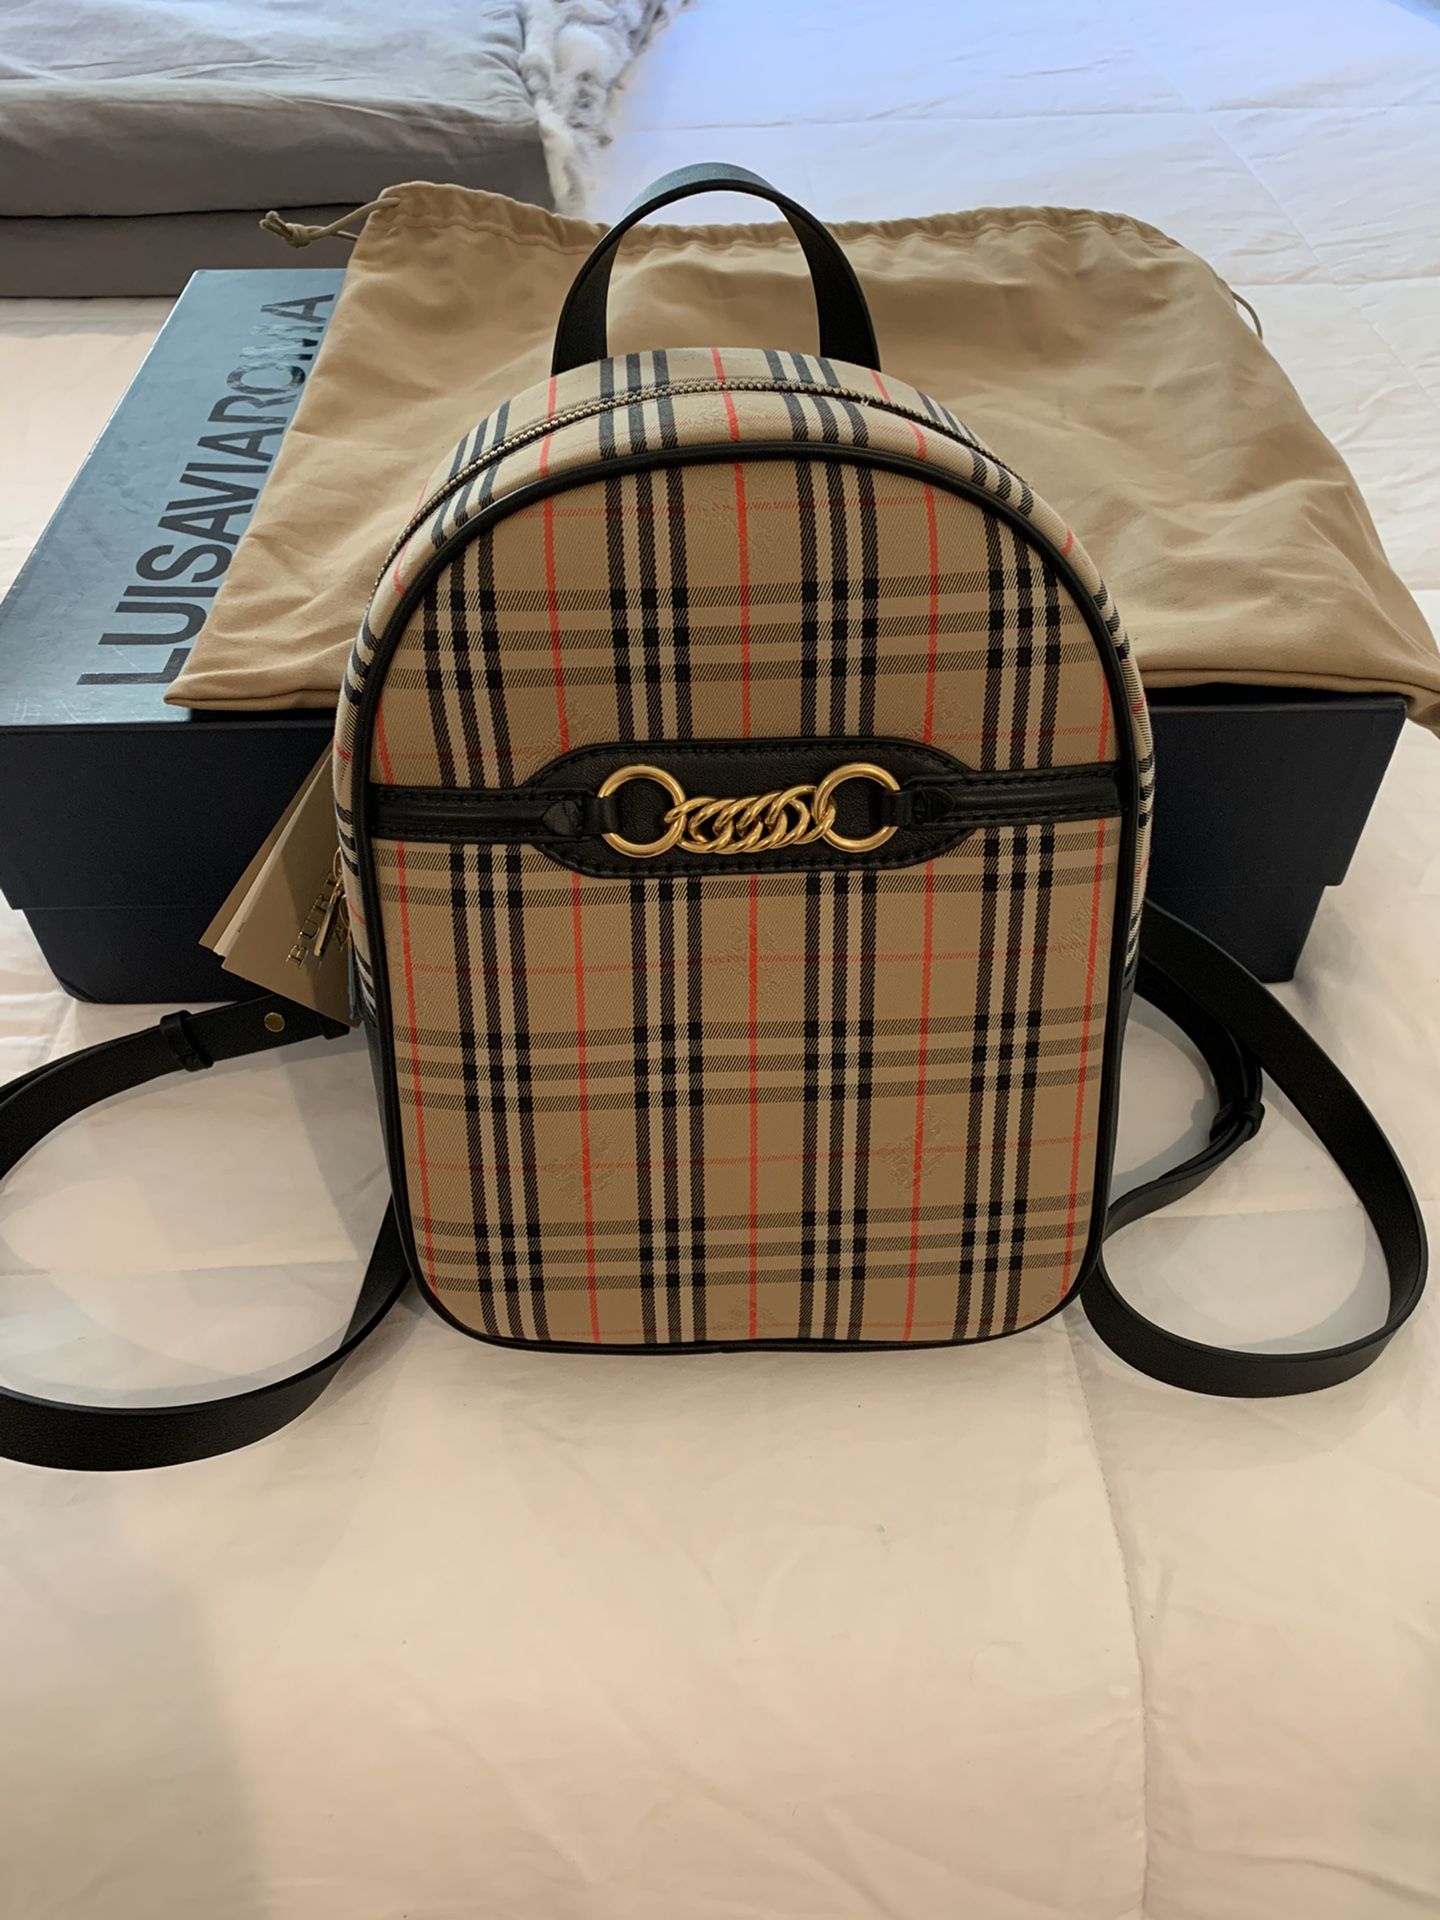 Burberry gold link check backpack - NWT